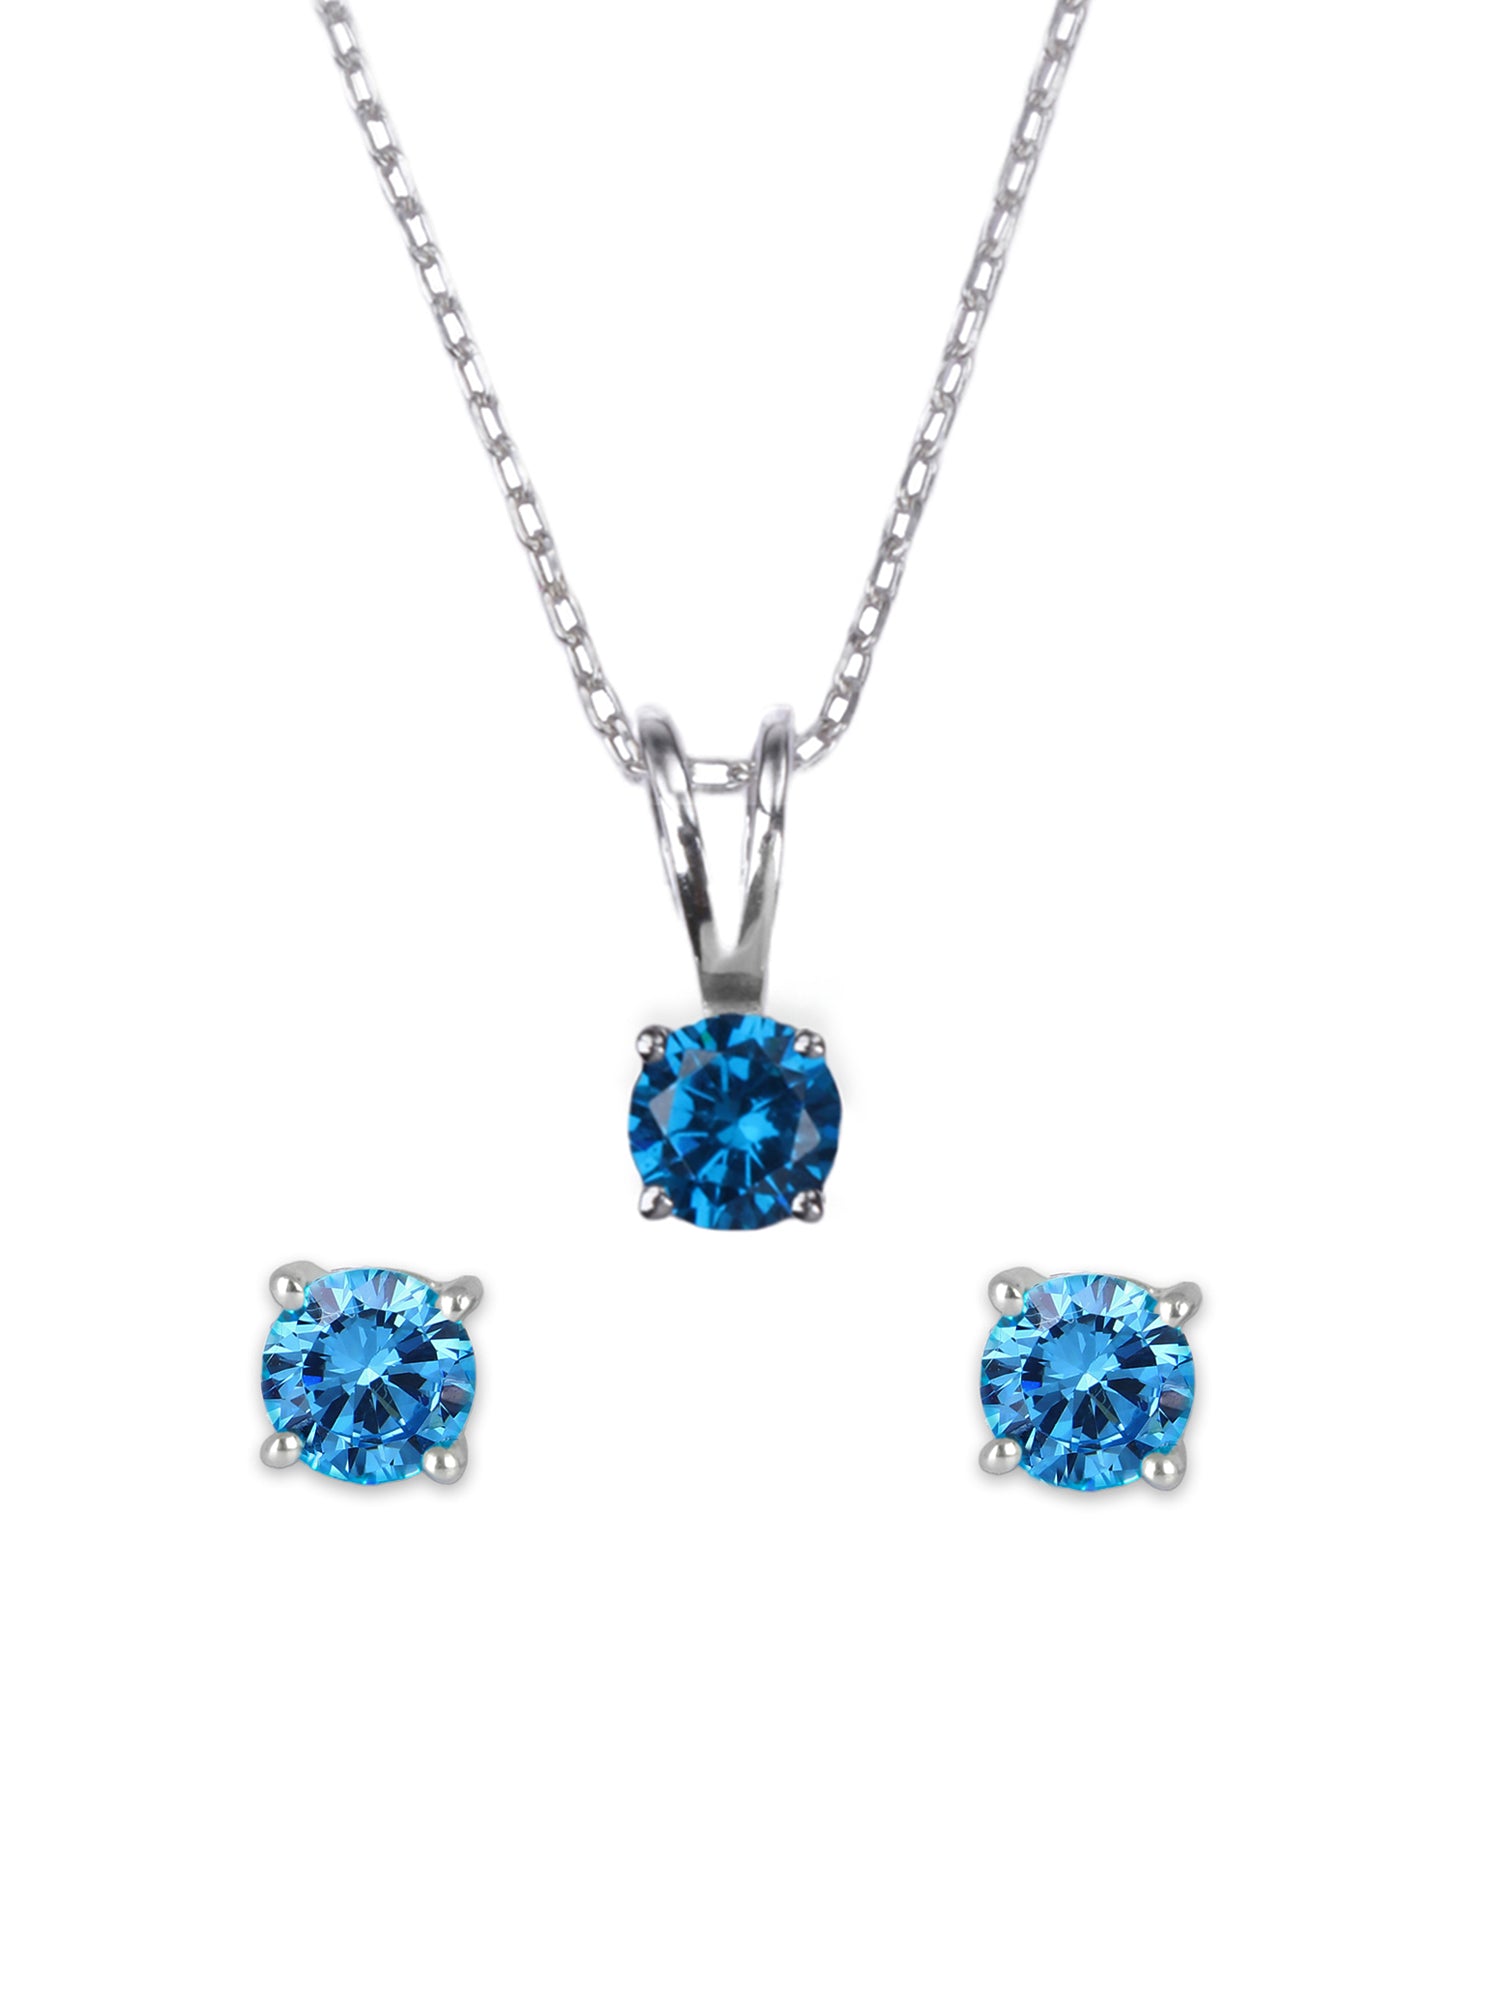 ORNATE JEWELS SWISS BLUE SOLITAIRE NECKLACE WITH EARRINGS-2